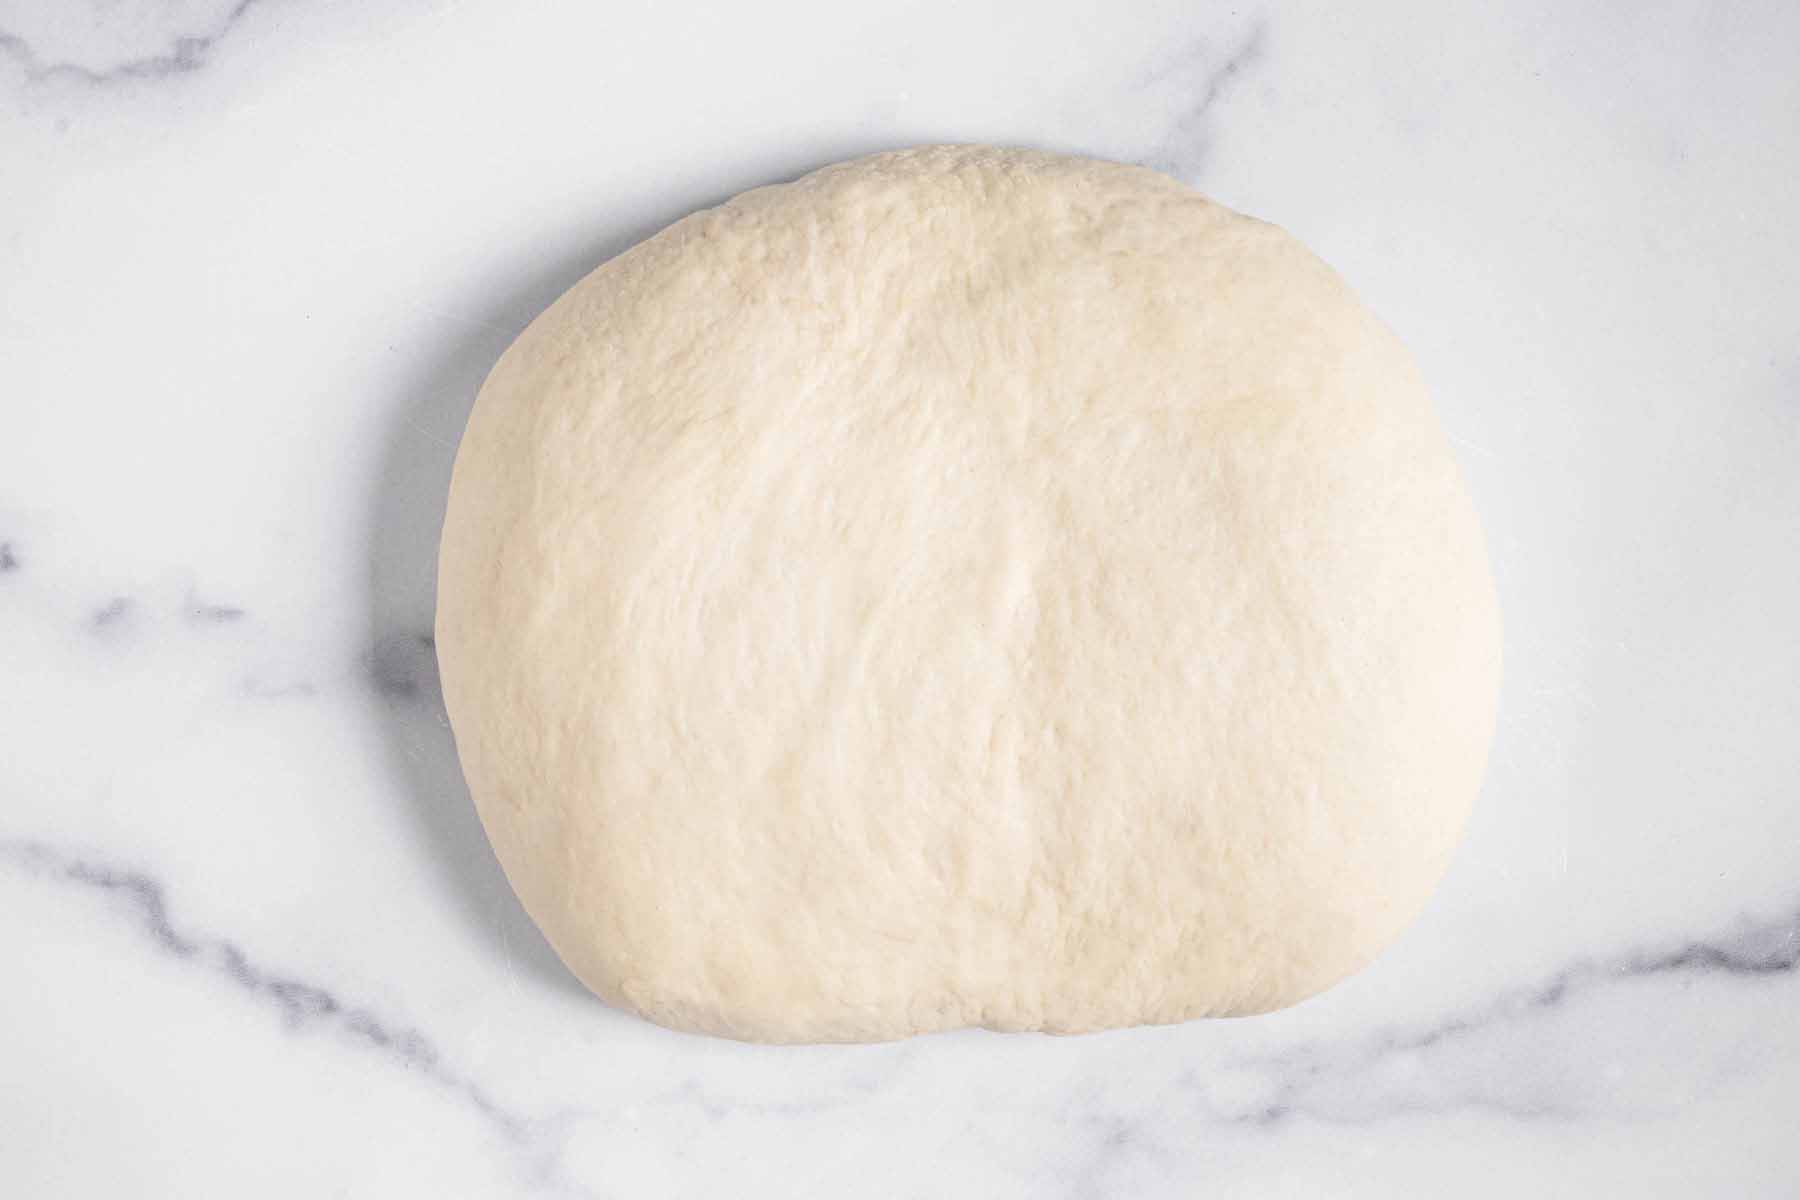 Ball of pizza dough on a marble surface.